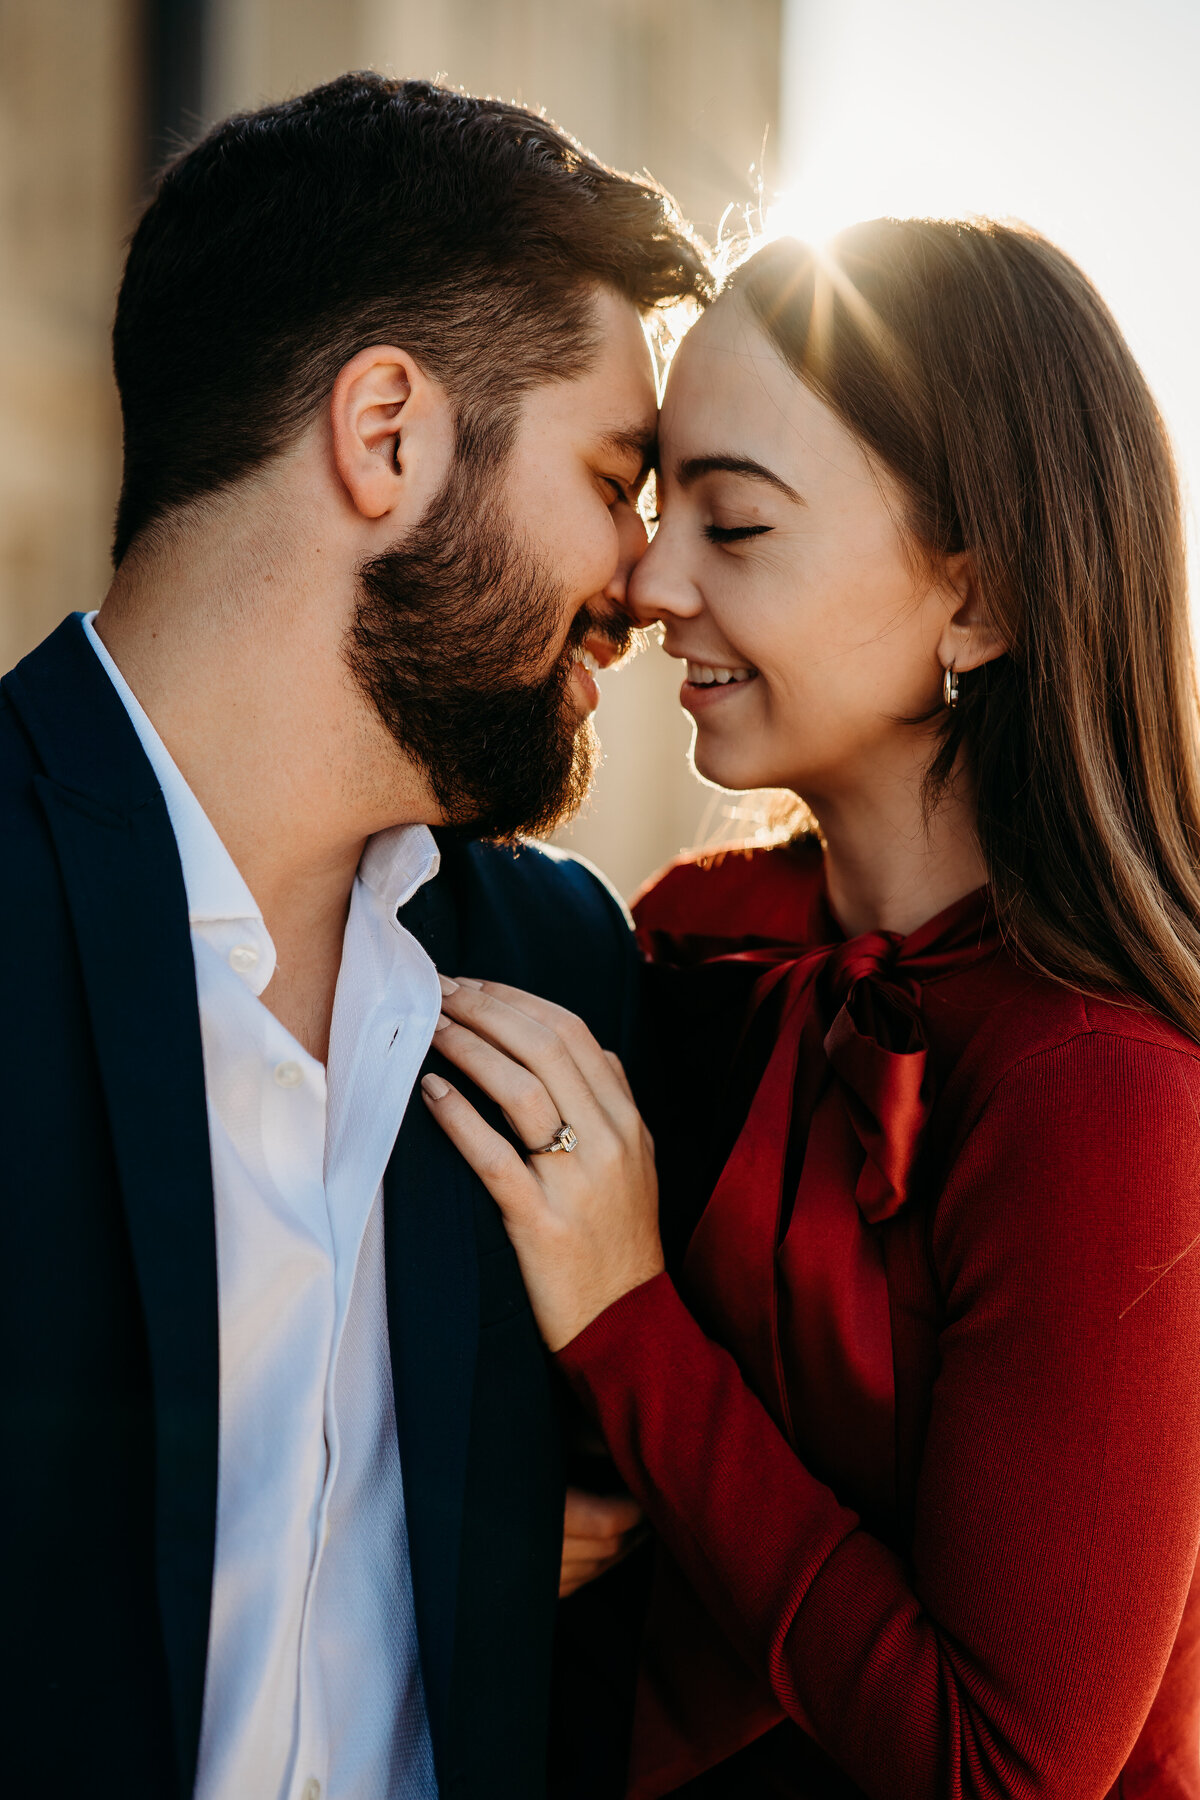 Engagement photographer in Fort Collins, Colorado